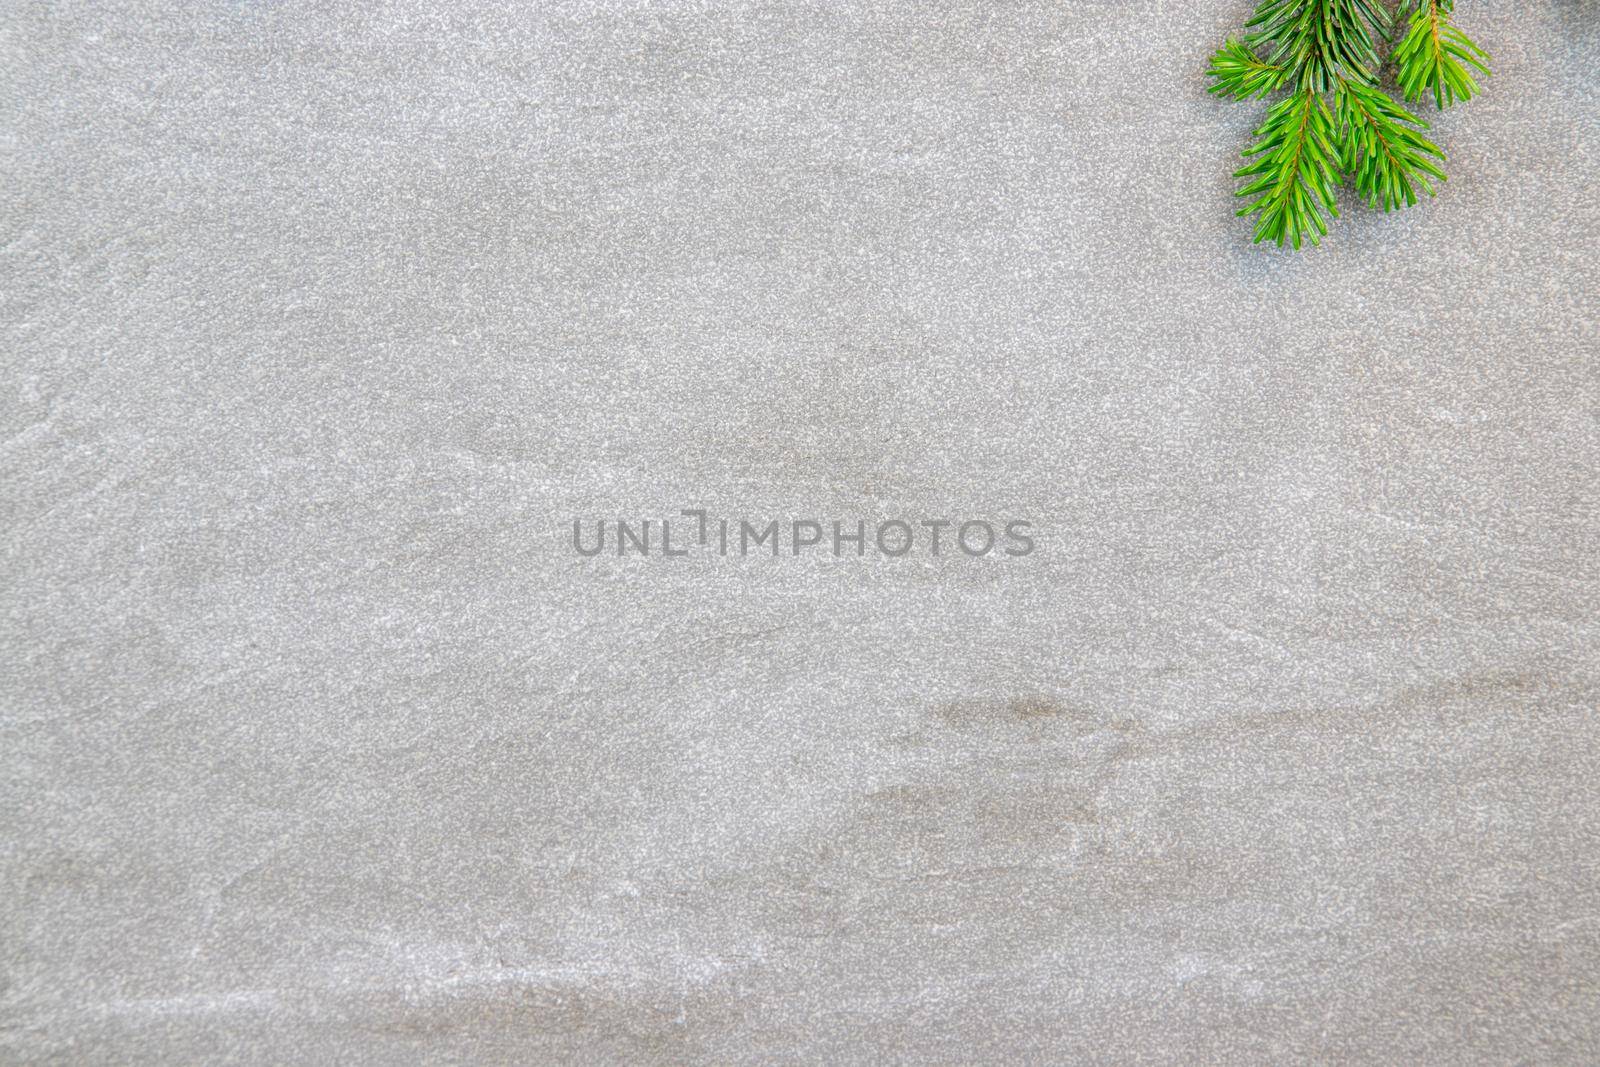 Christmas motif, texture, background with branches of a Nordmann fir right at the top on a dark grey marbled  background with free space for text. by reinerc